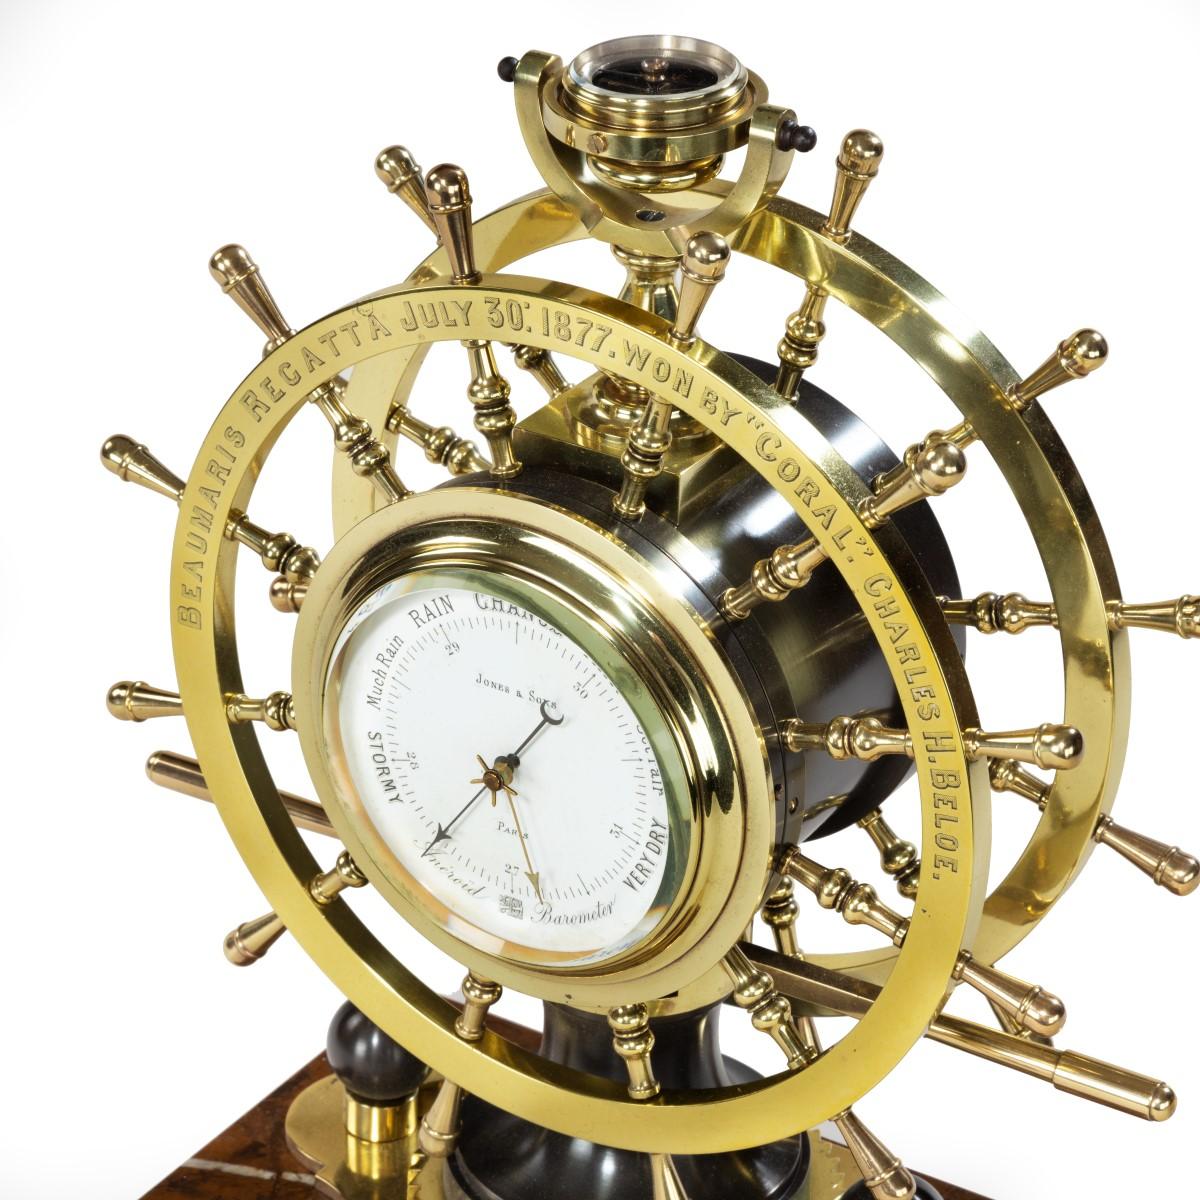 Victorian double steering-wheel desk clock and barometer racing trophy for the Beaumaris Regatta July 30 1877 – won by ‘Coral’ Charles H Beloe, comprising two brass steering wheels, one enclosing a clock and the other a barometer, set upon a